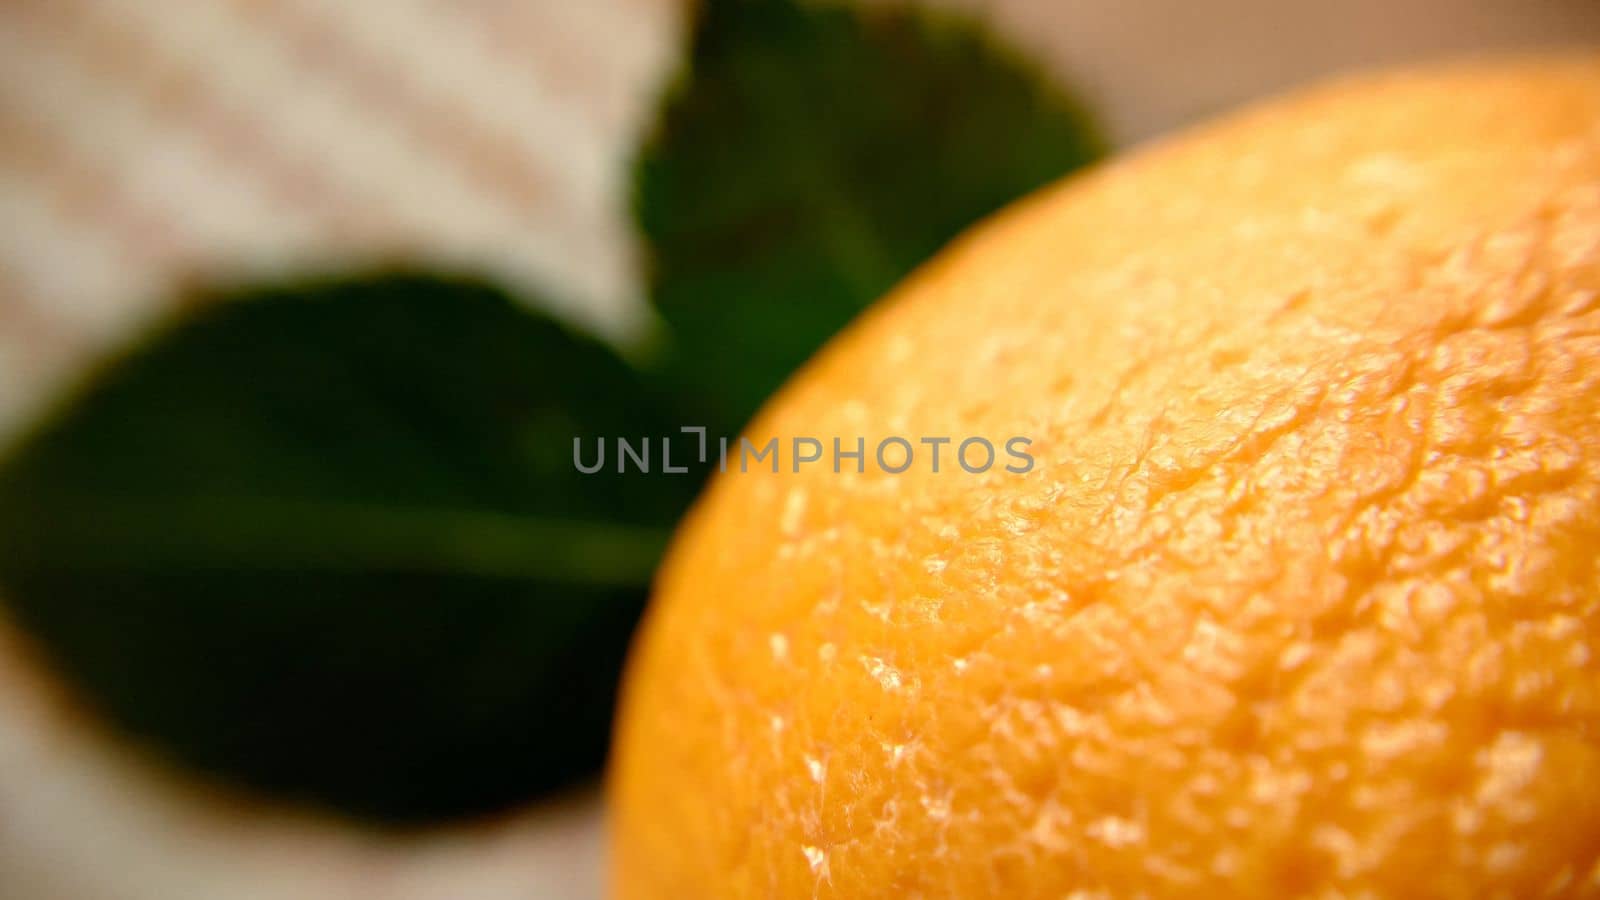 Top view of an orange with green leaves leaves close-up.Macro photography.Texture or background.Selective focus.